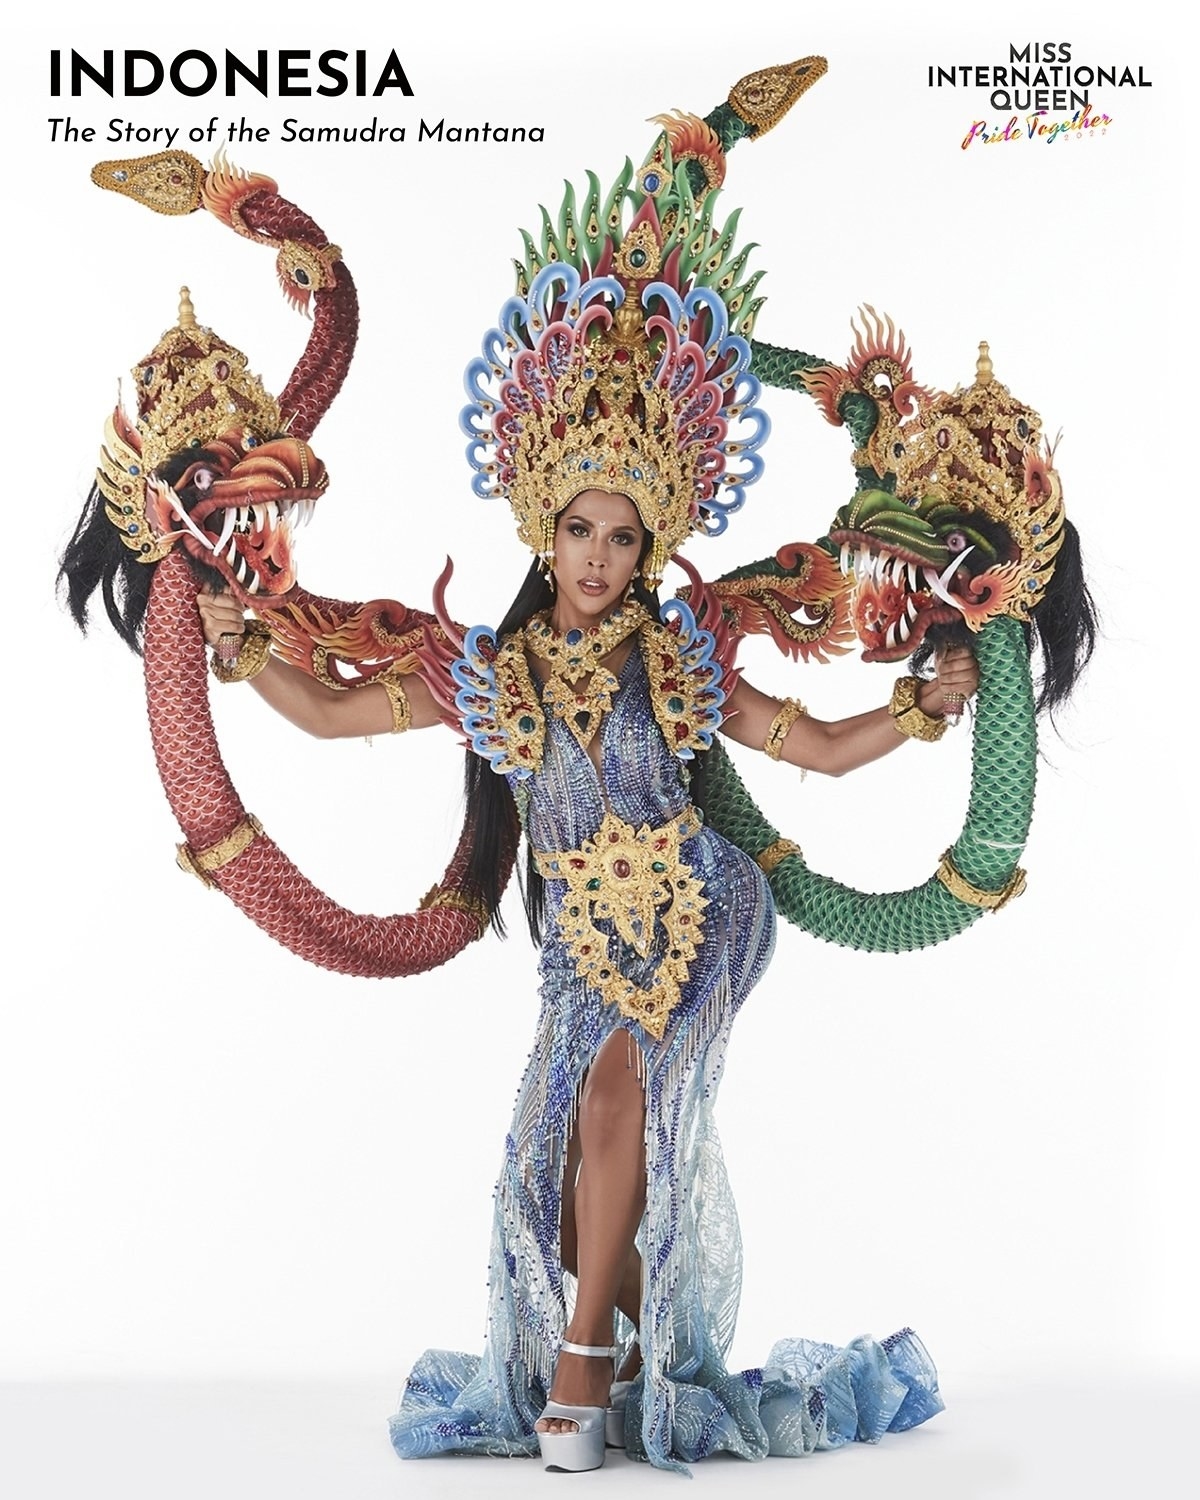 Miss Indonesia in a blue dress and holding decorative snakes